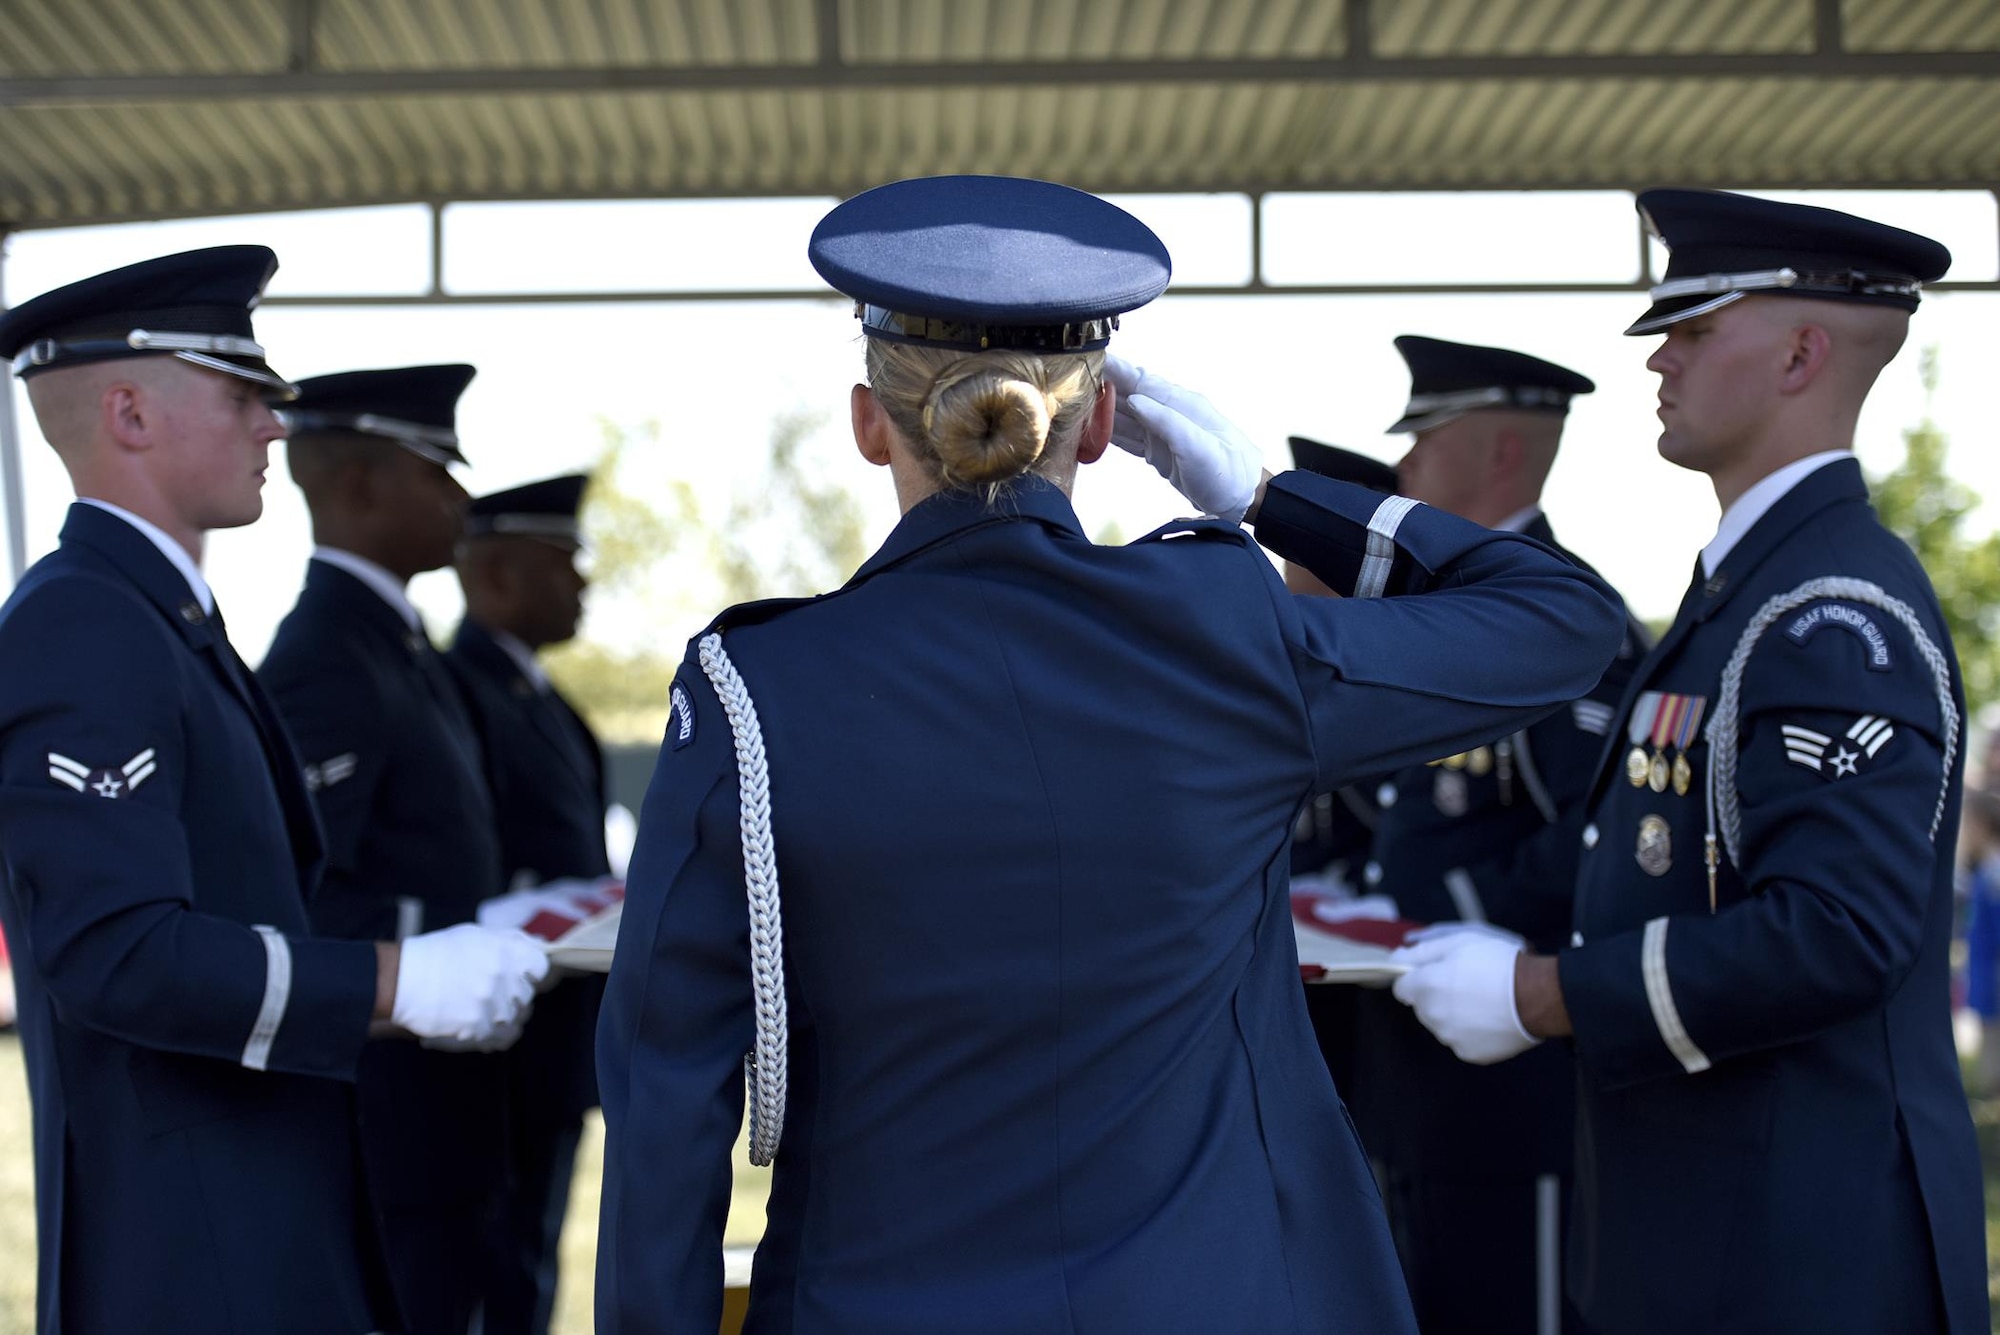 Members of the U.S. Air Force Honor Guard provide full military honors for the late 2nd Lt. Elanie Harmon, one of the original Women Airforce Service Pilots, during a ceremony held in her honor at Alrington National Cemetery, Va., Sept. 7, 2016. Harmon died in 2015 at the age of 95. (U.S. Air Force photo/Staff Sgt. Alyssa C. Gibson)